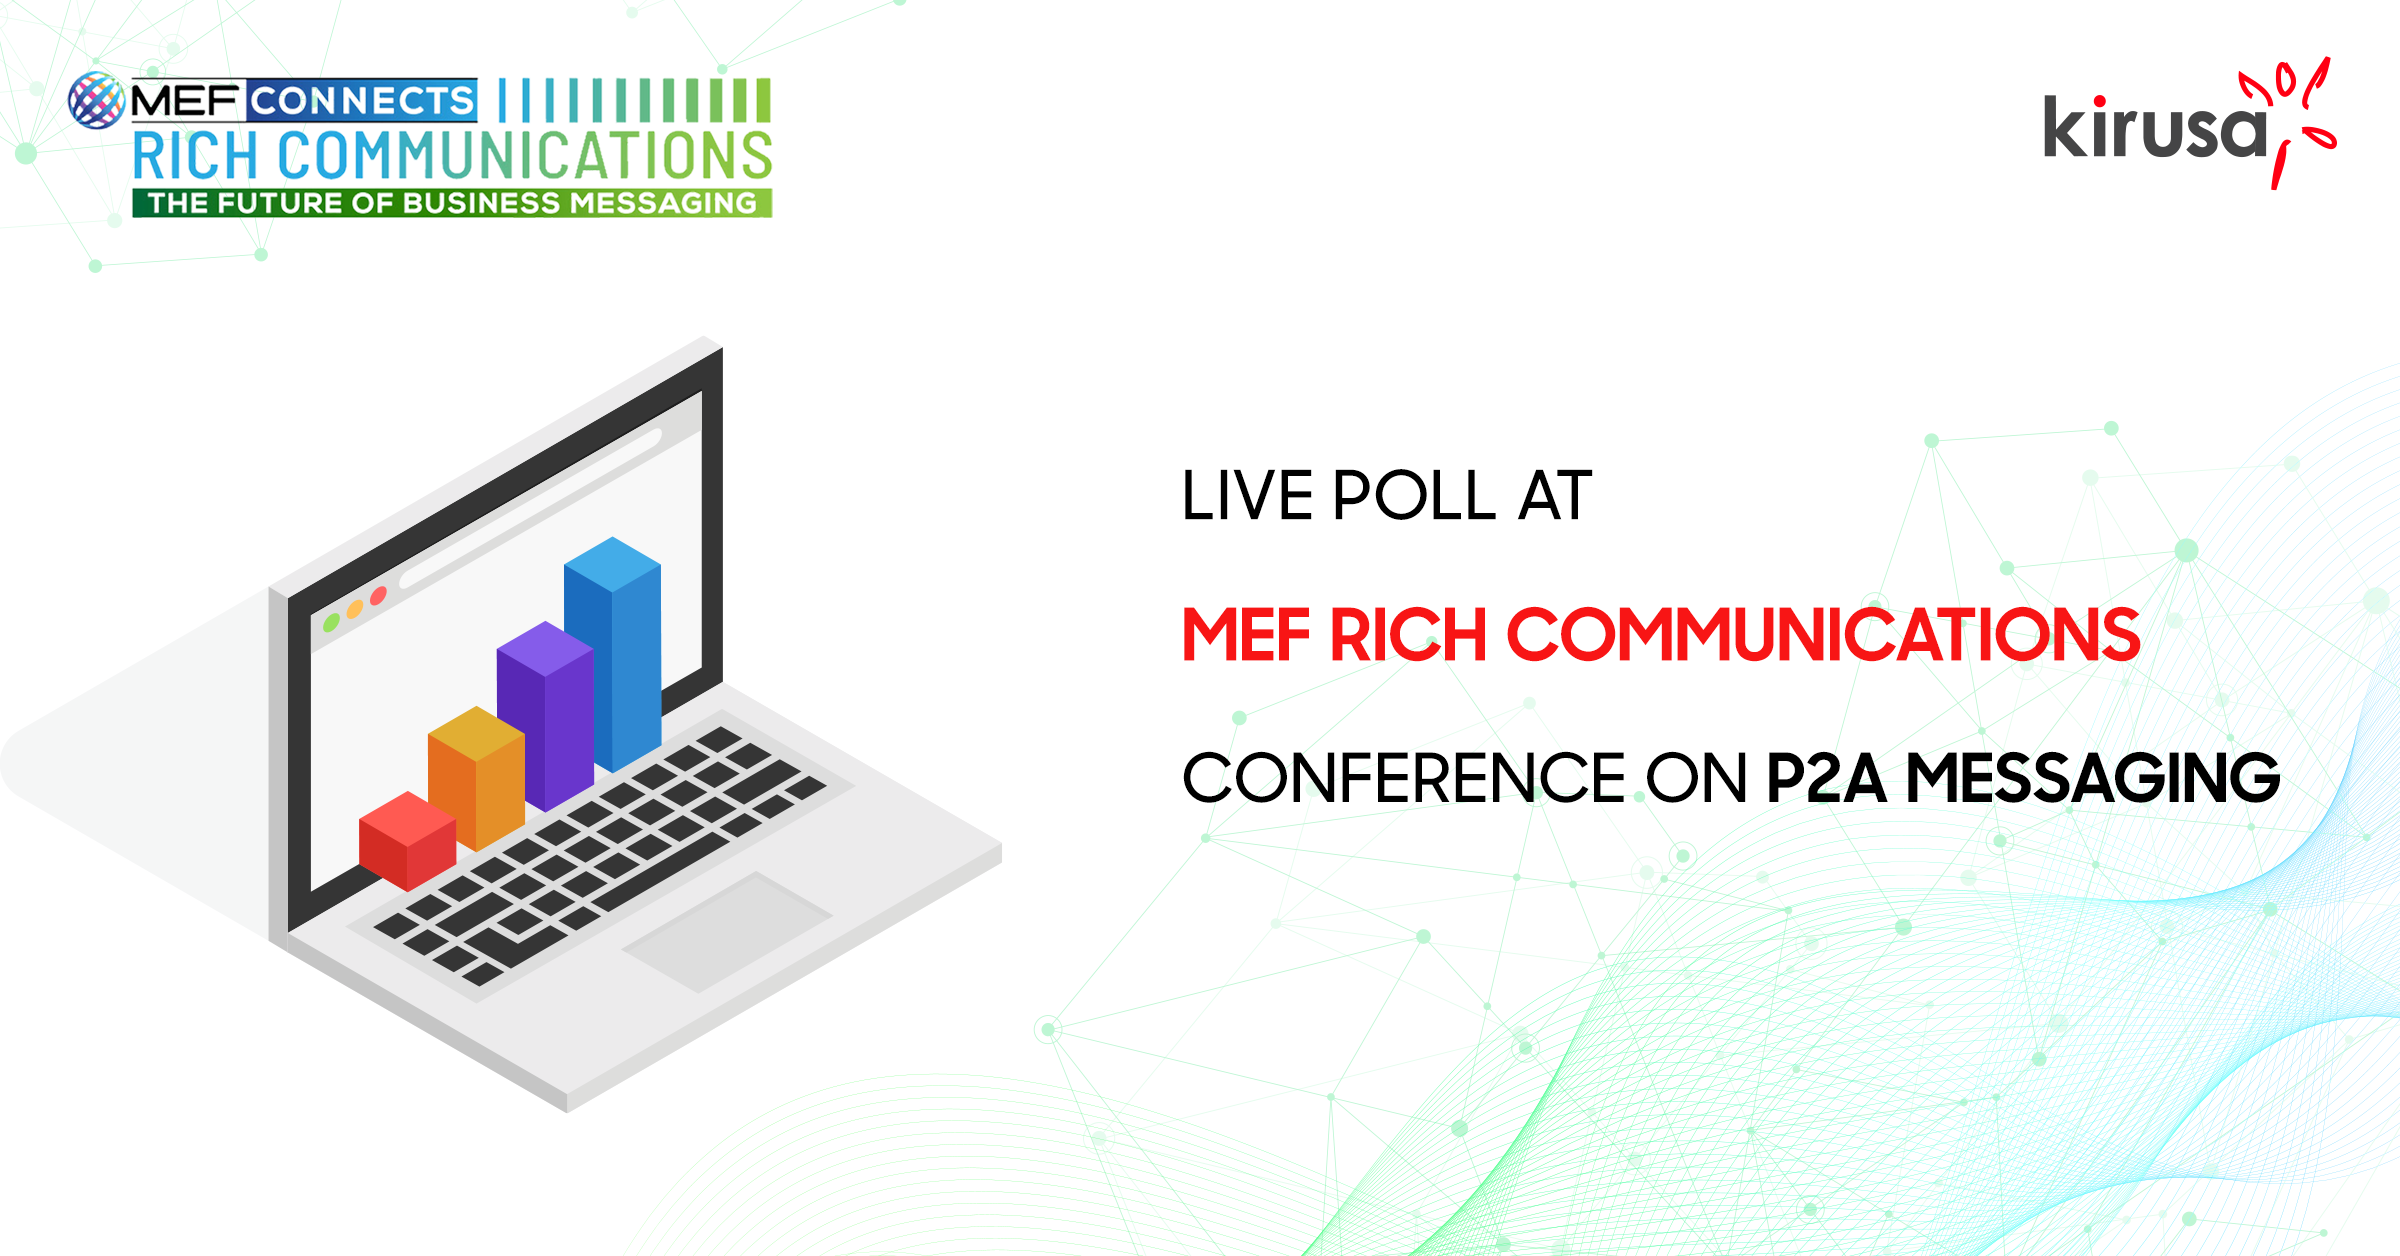 Live Poll At Mef Rich Communications Conference On P2A Messaging